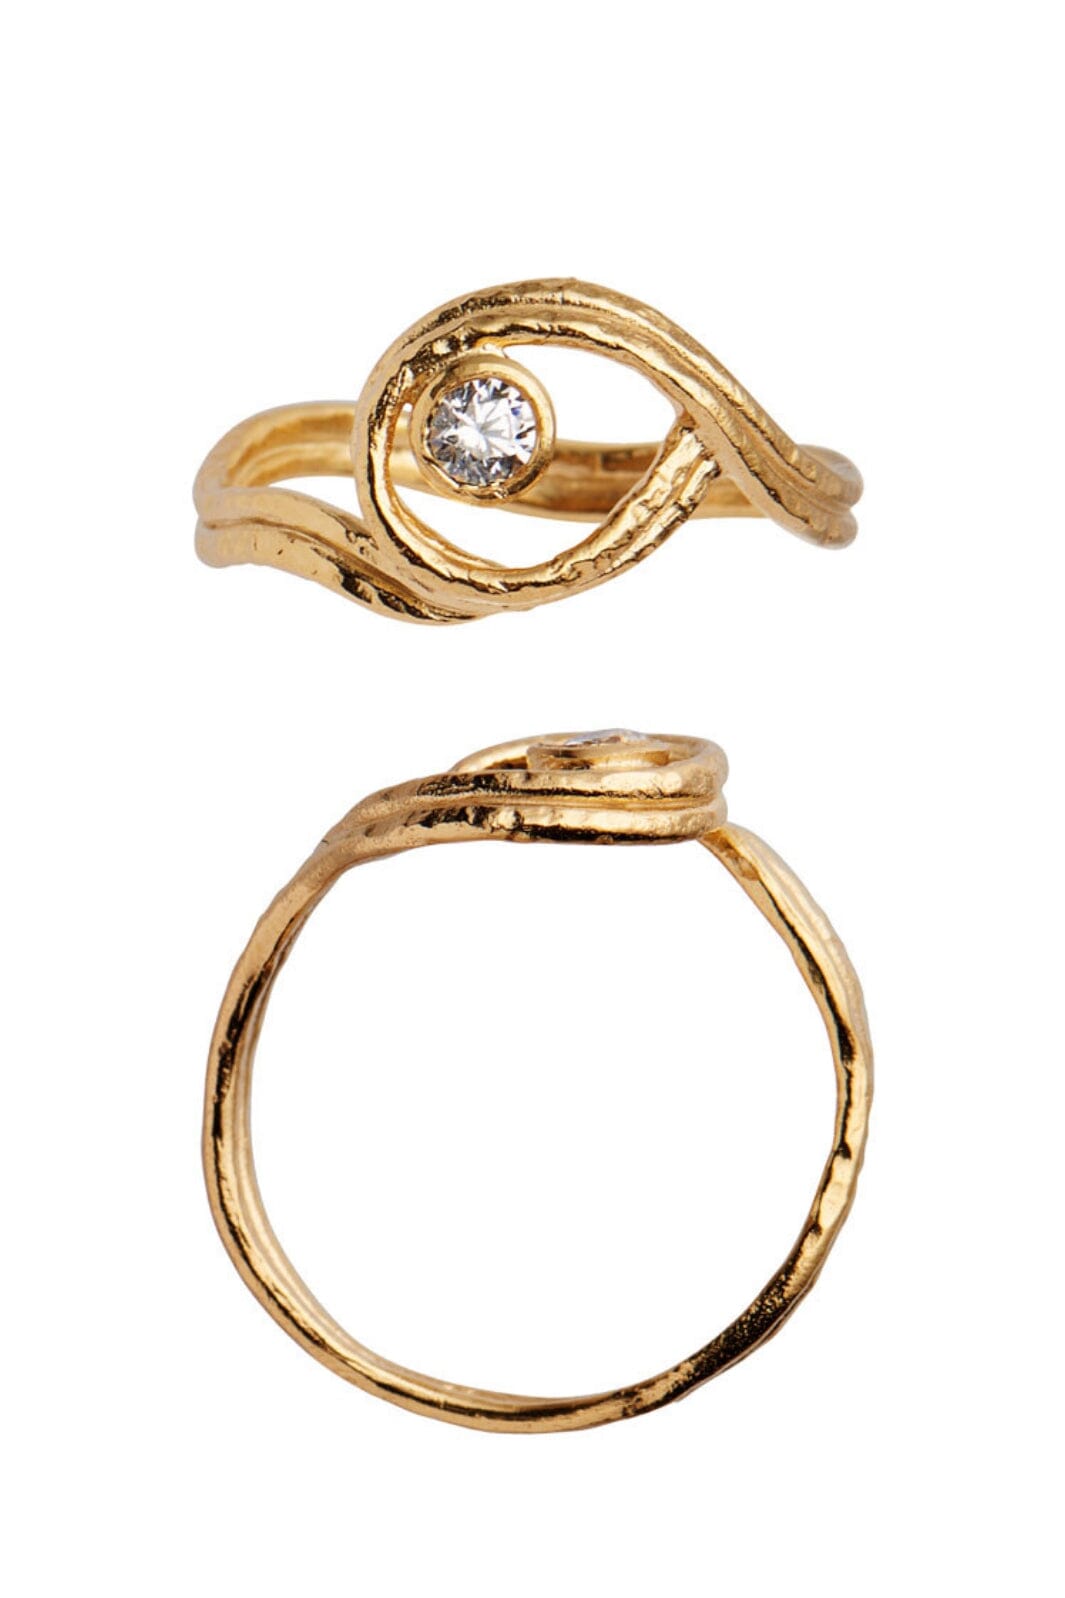 Stine A - Balancé Ring With Stone Gold - 4044-02 Ringe 